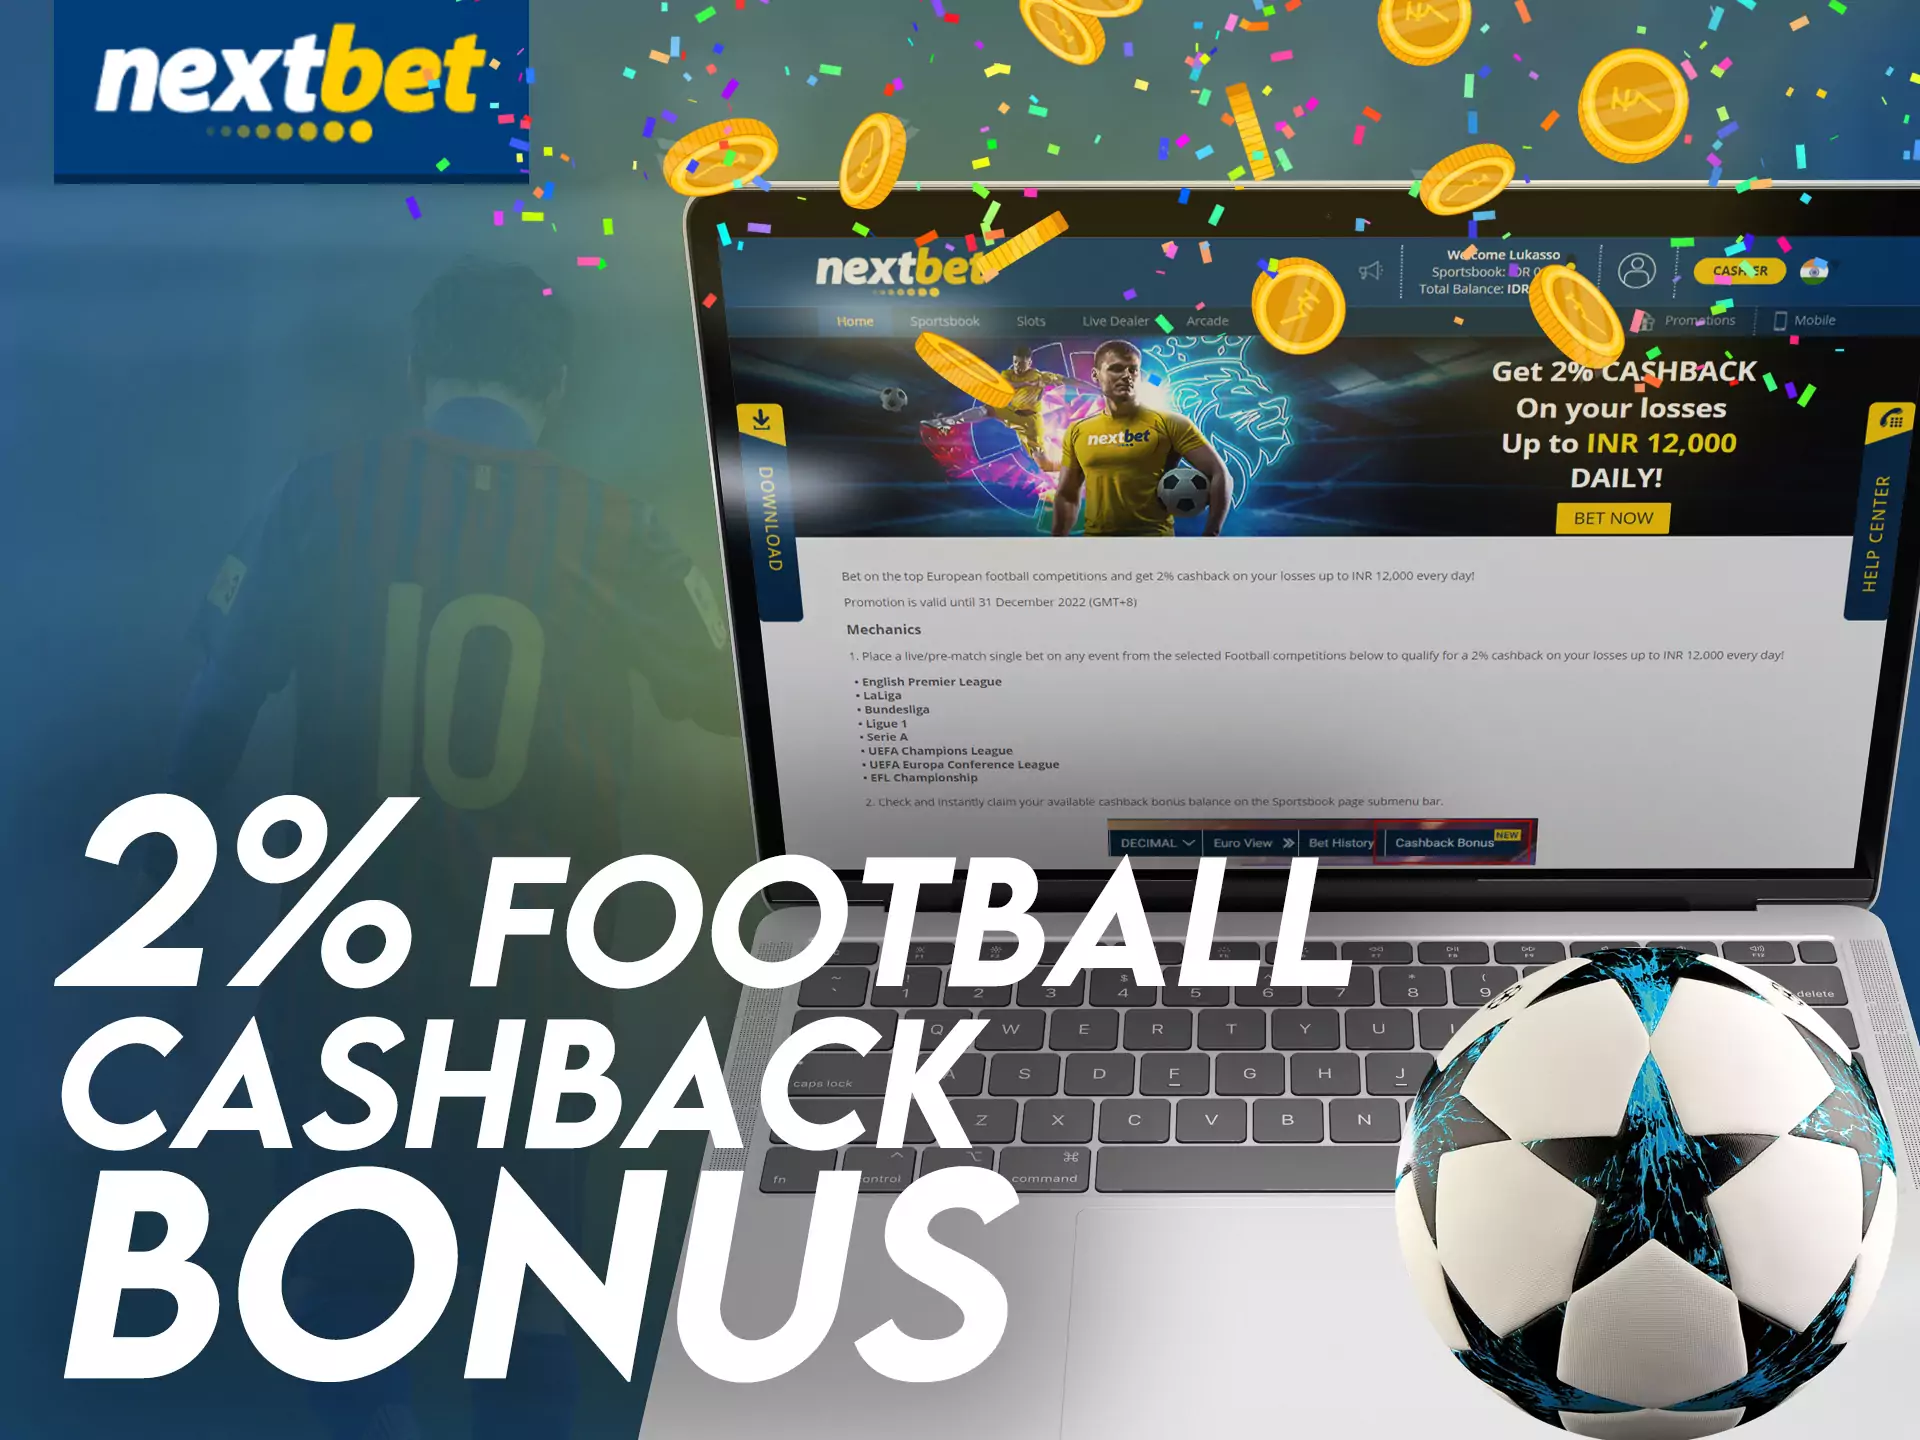 In Nextbet, you can get a cashback bonus for betting on football.